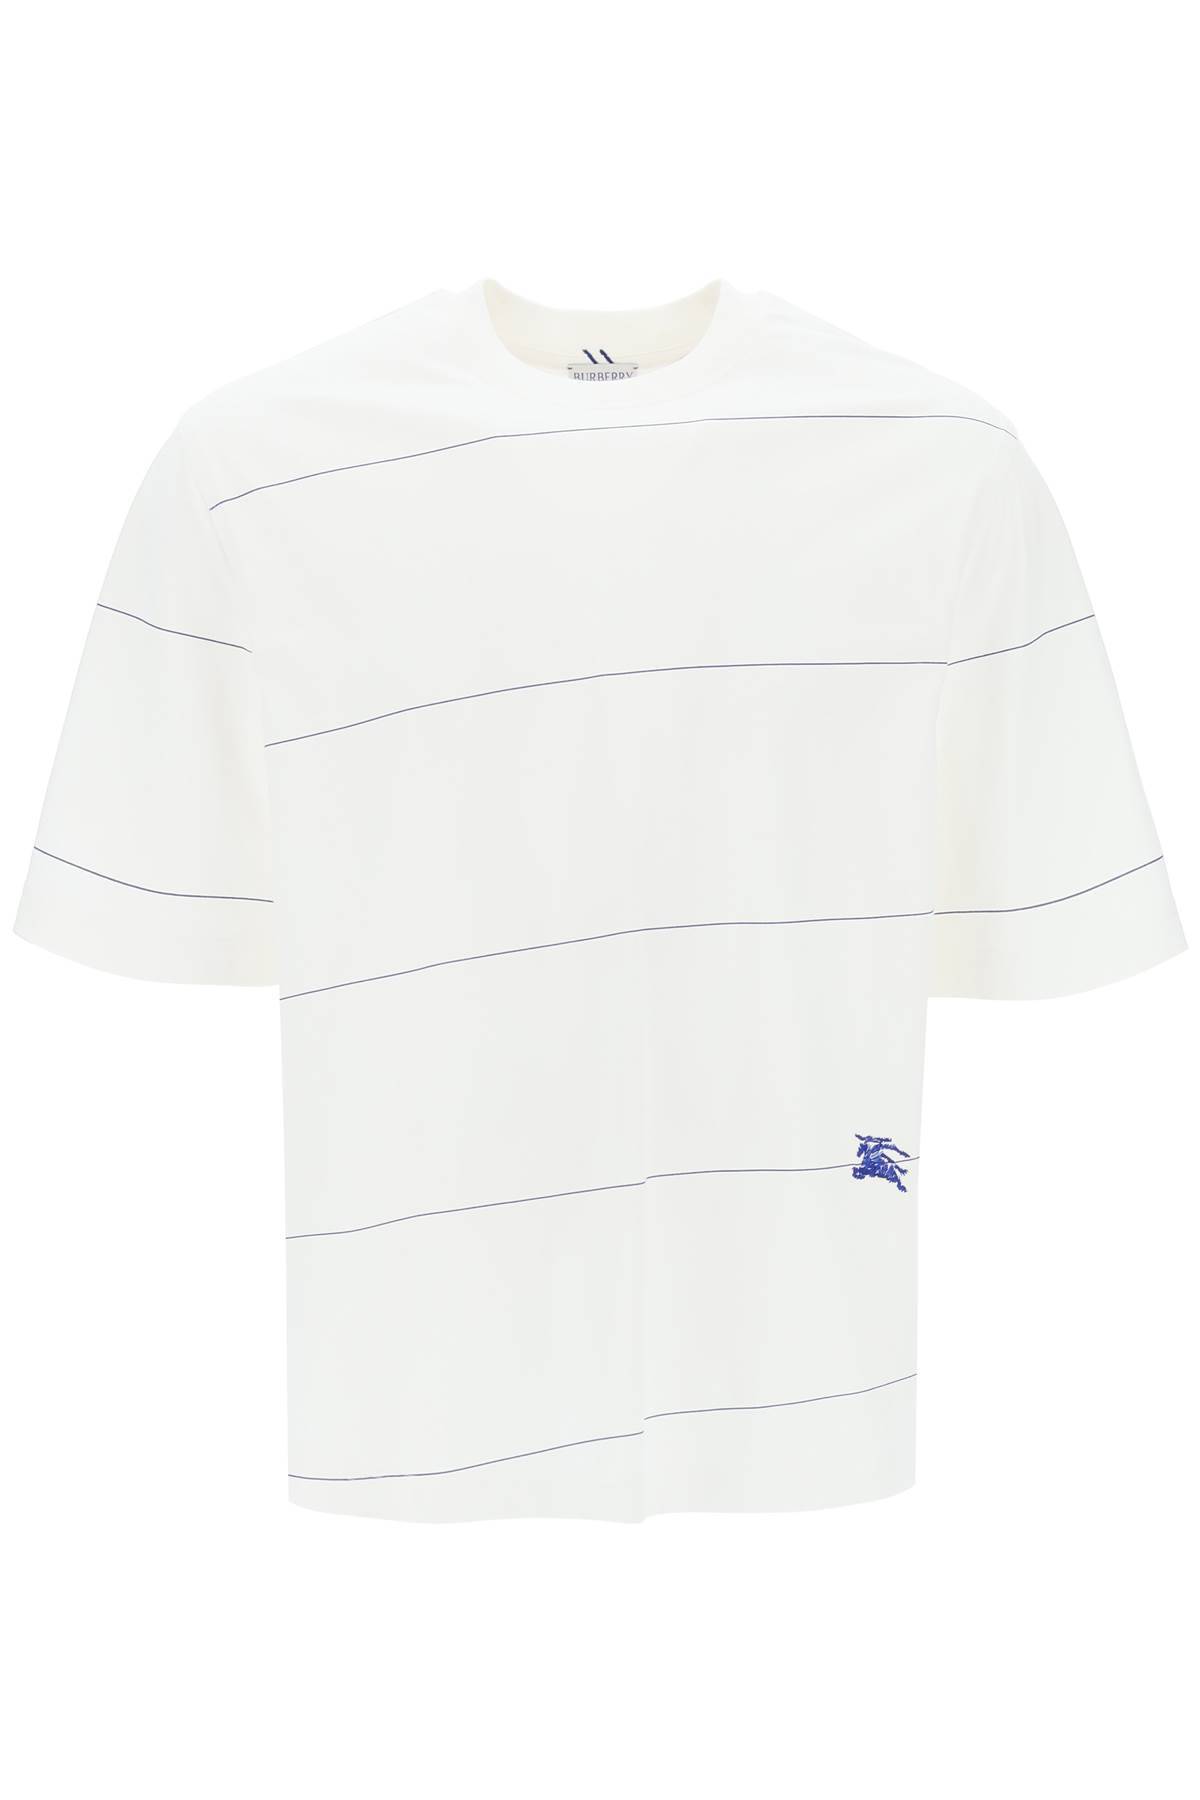 Burberry BURBERRY striped t-shirt with ekd embroidery